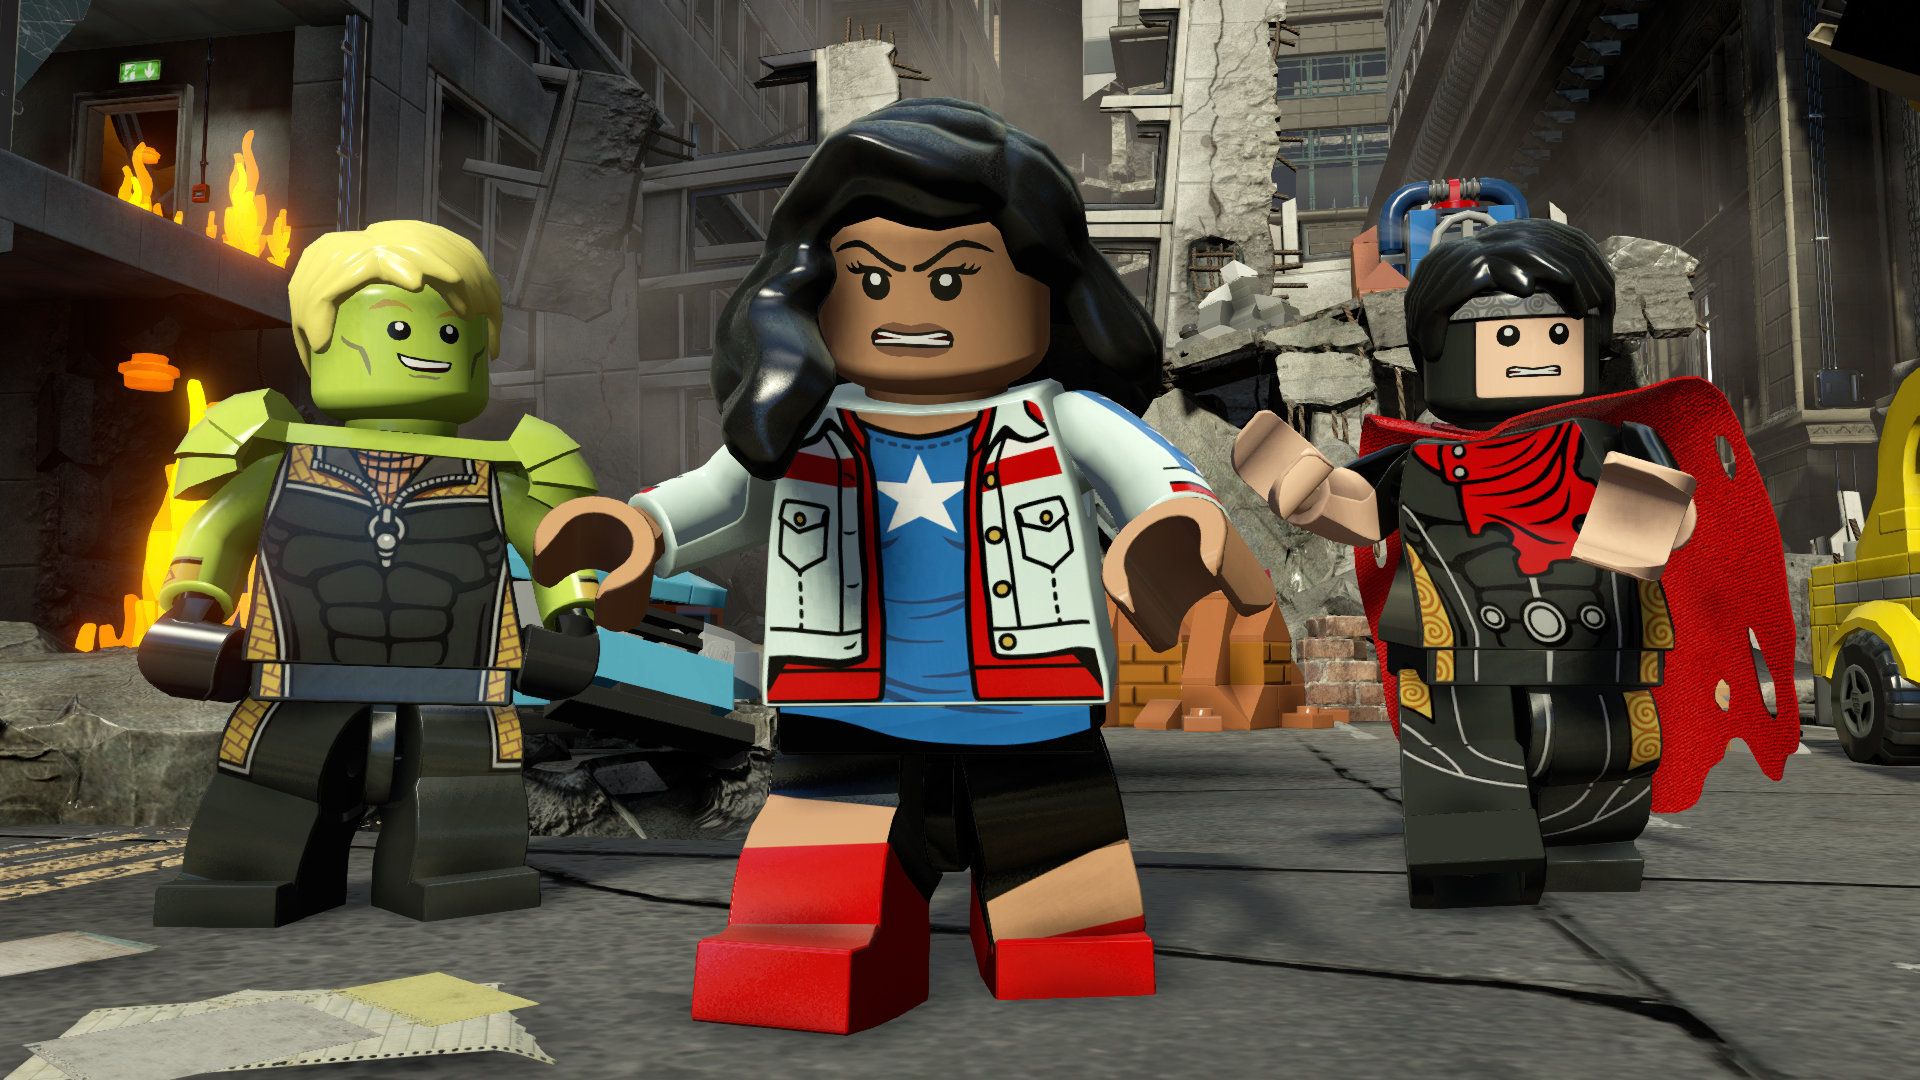 Lego Avengers Features First Openly Gay Superheroes in a Video